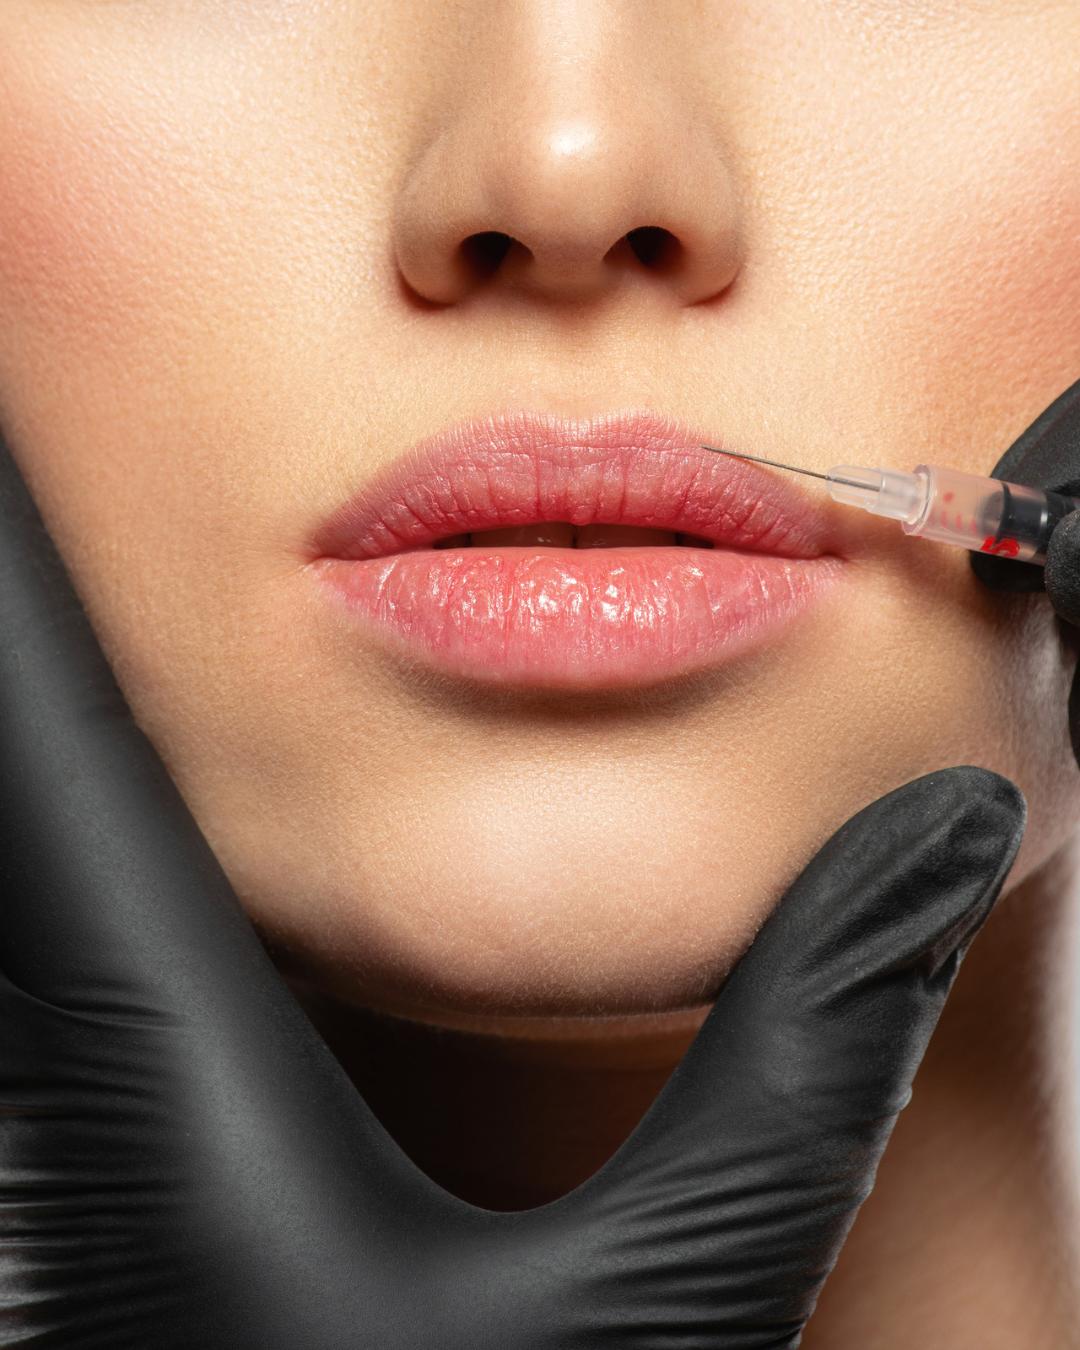 Dermal fillers are a great anti-ageing treatment